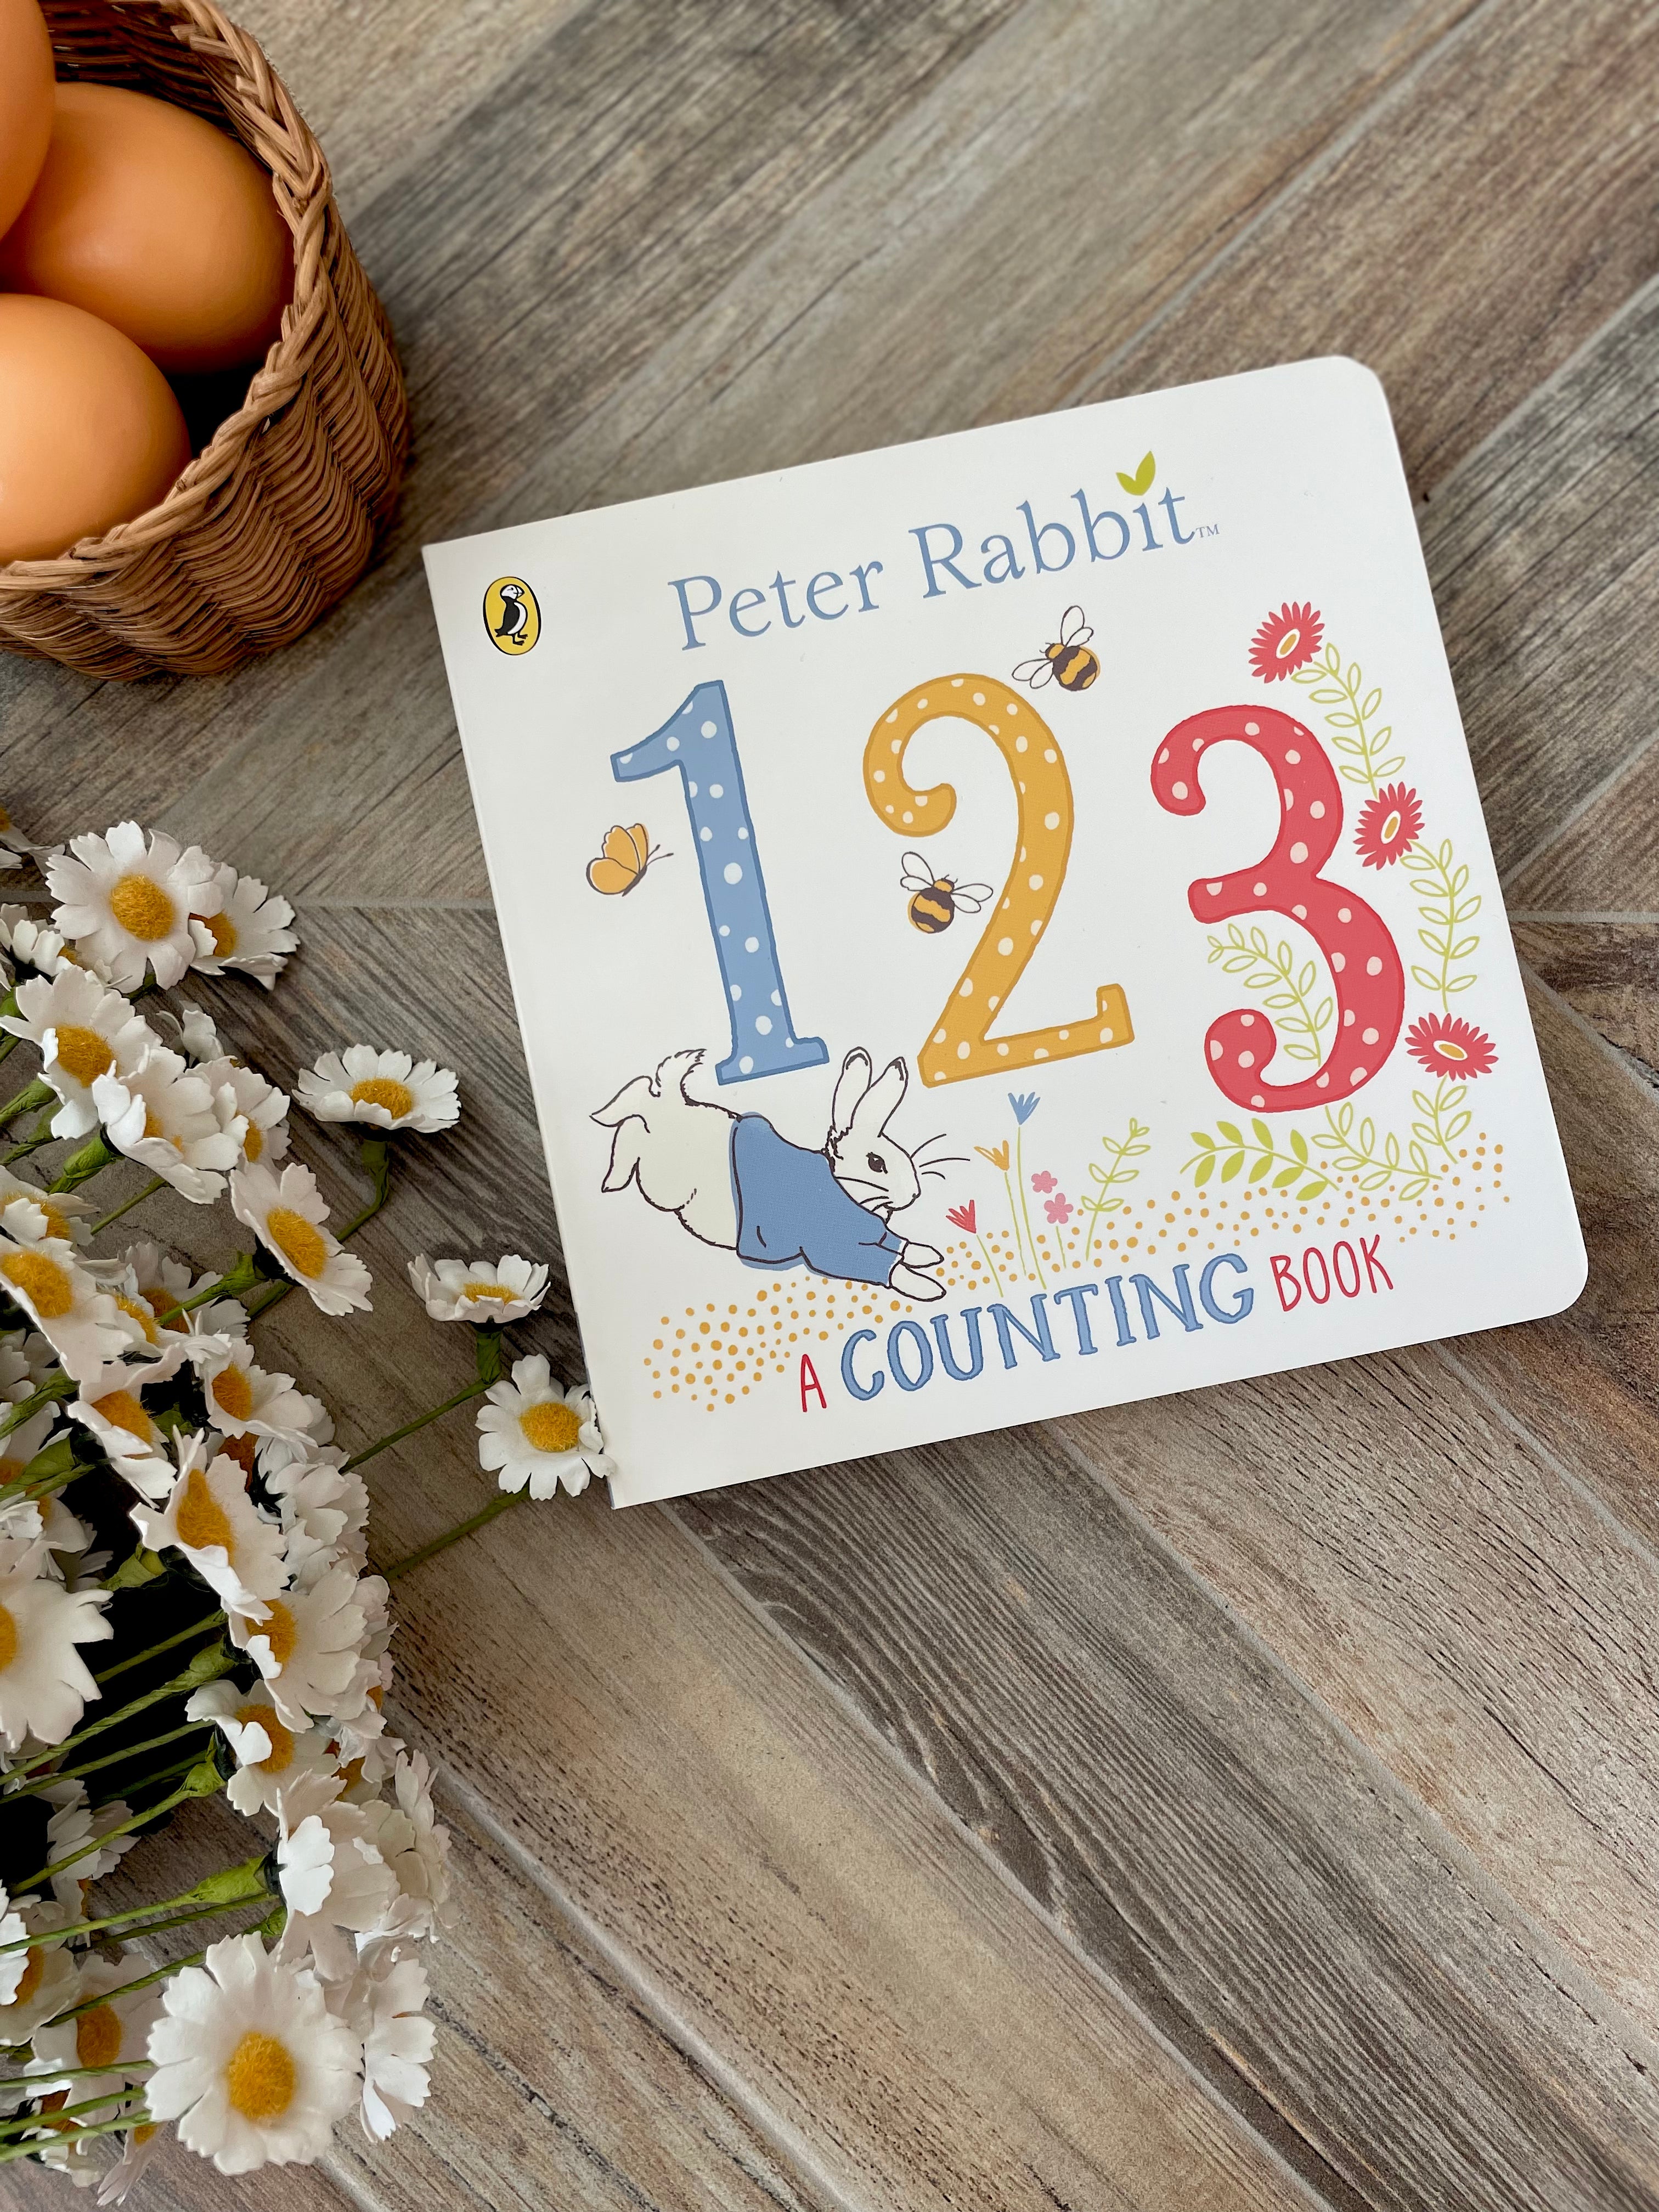 Peter Rabbit 1 2 3 - A Counting Book